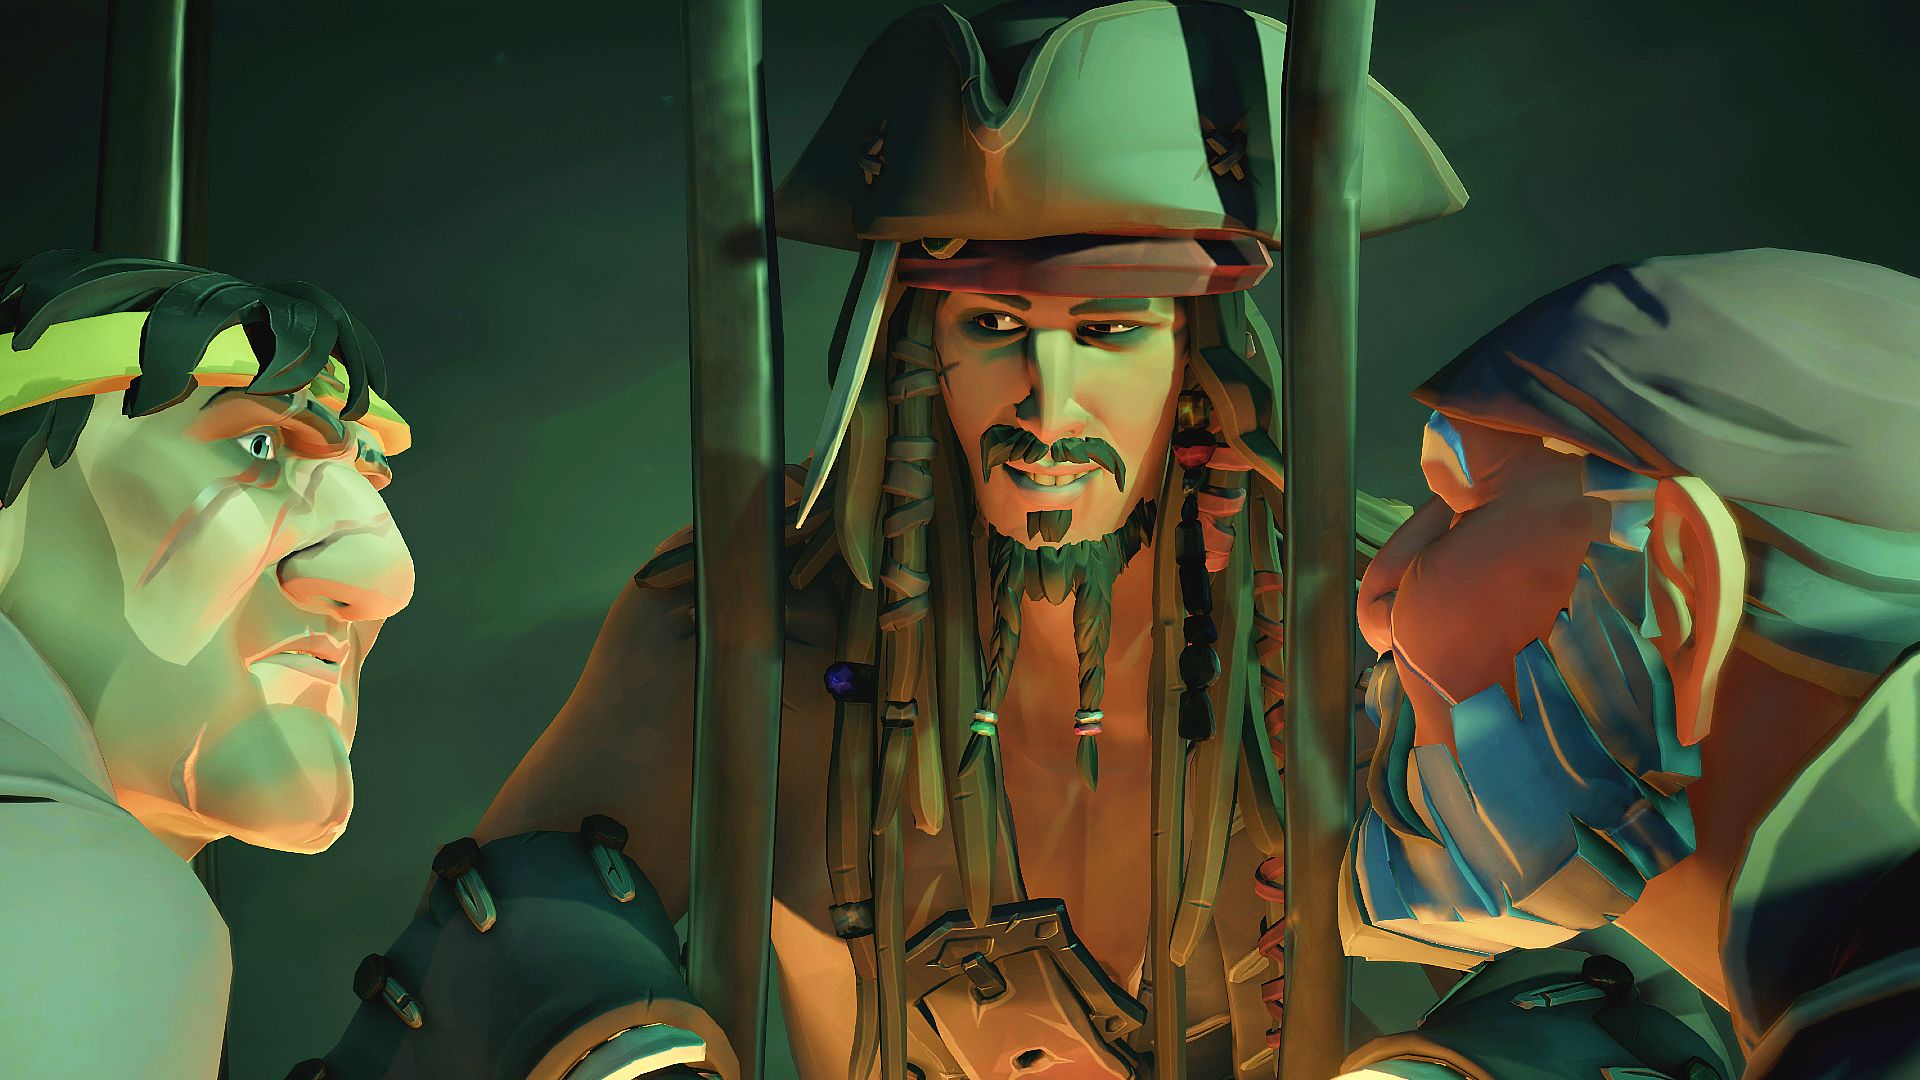 Sea of Thieves: A Pirate’s Life is more than a Pirates of the Caribbean crossover